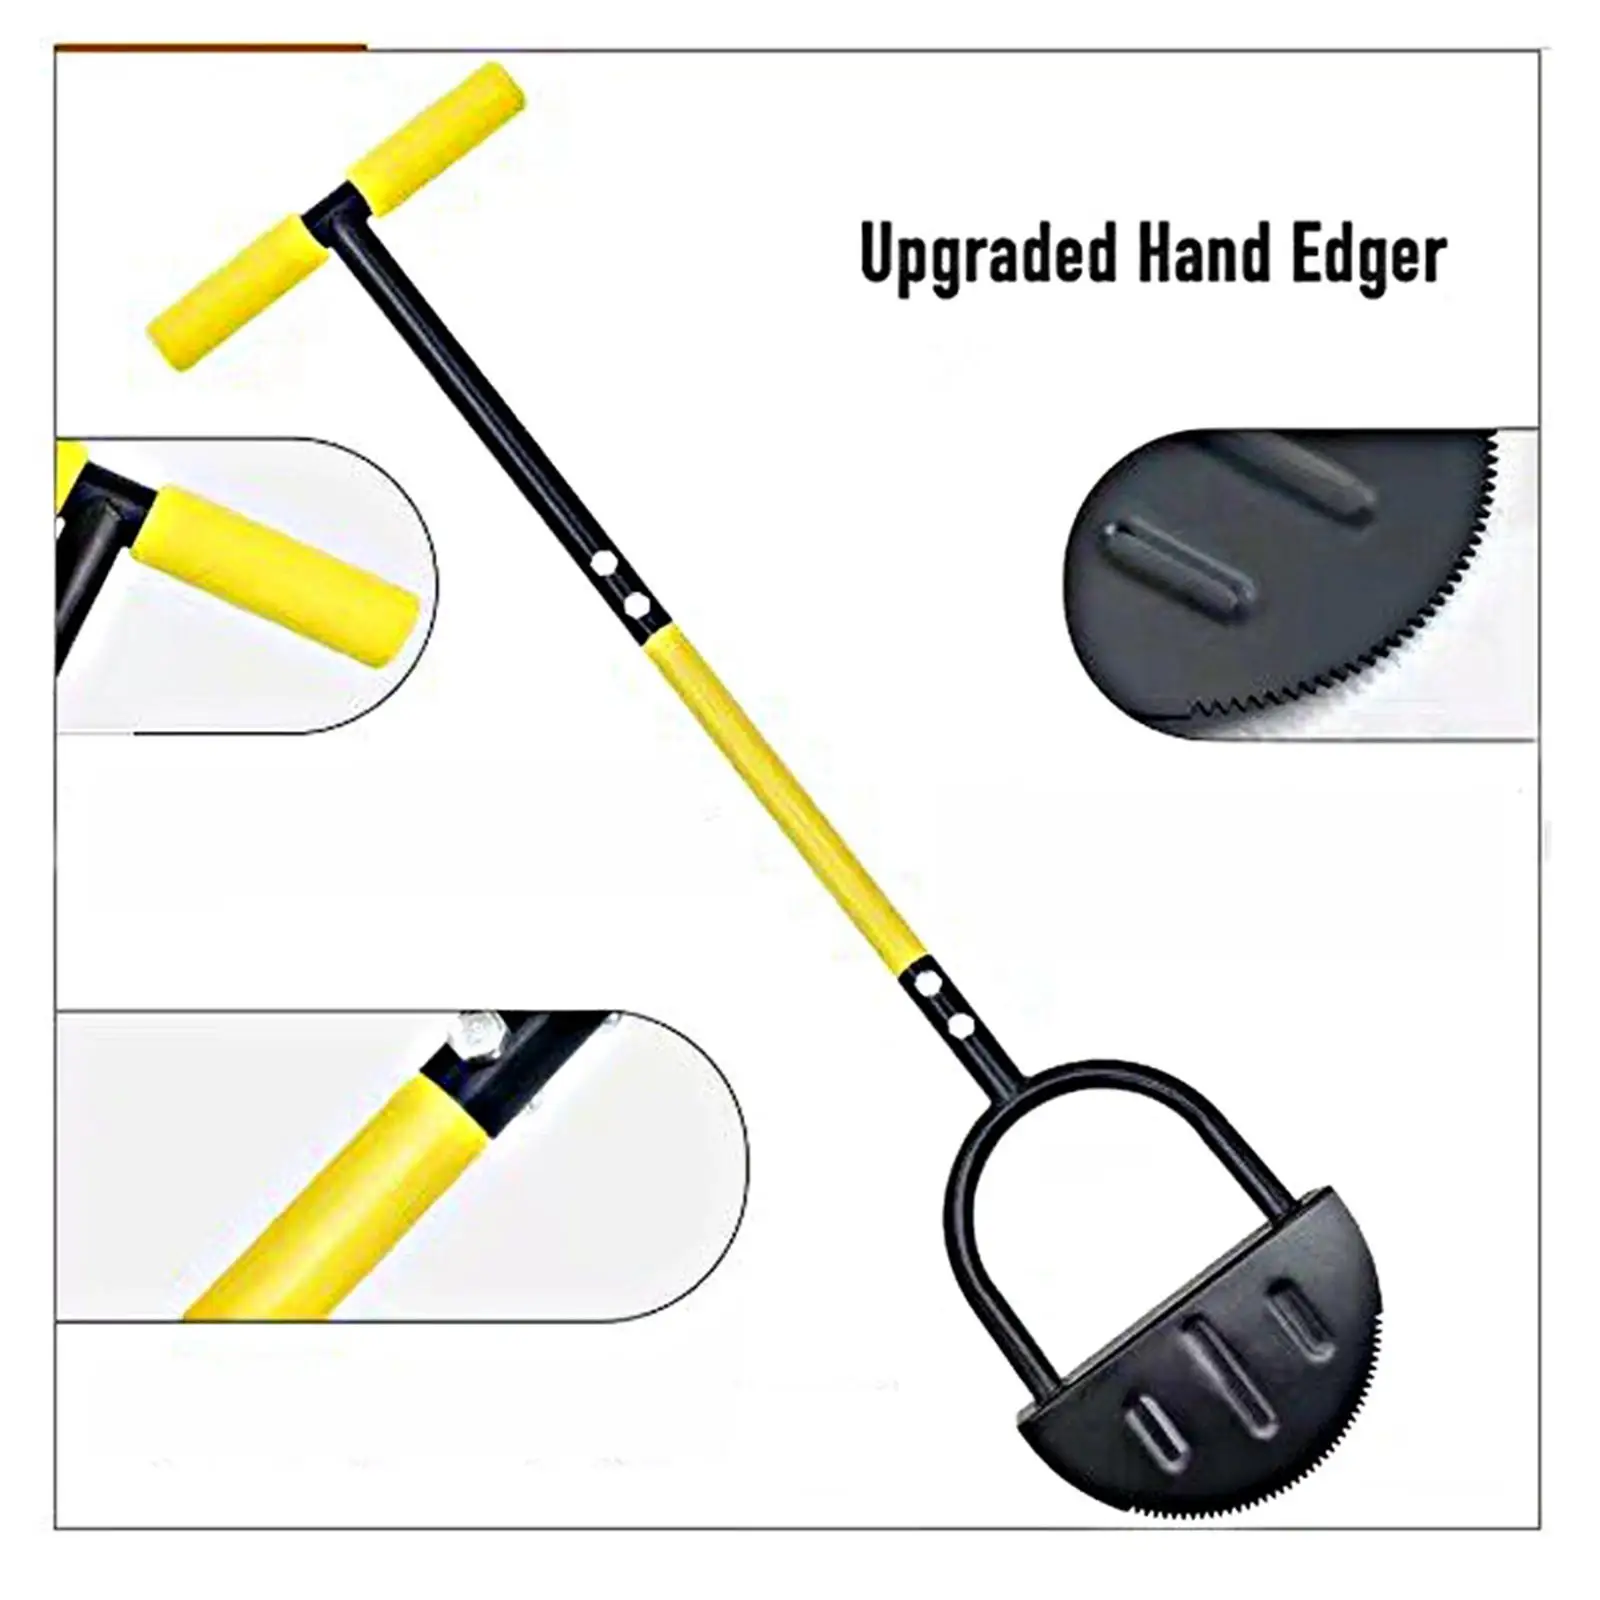 Lawn Edger with Handle Garden Trimming Edging Tool Manual Lawn Edger with Saw for Cleaning Edges Garden Flower Beds Landscaping